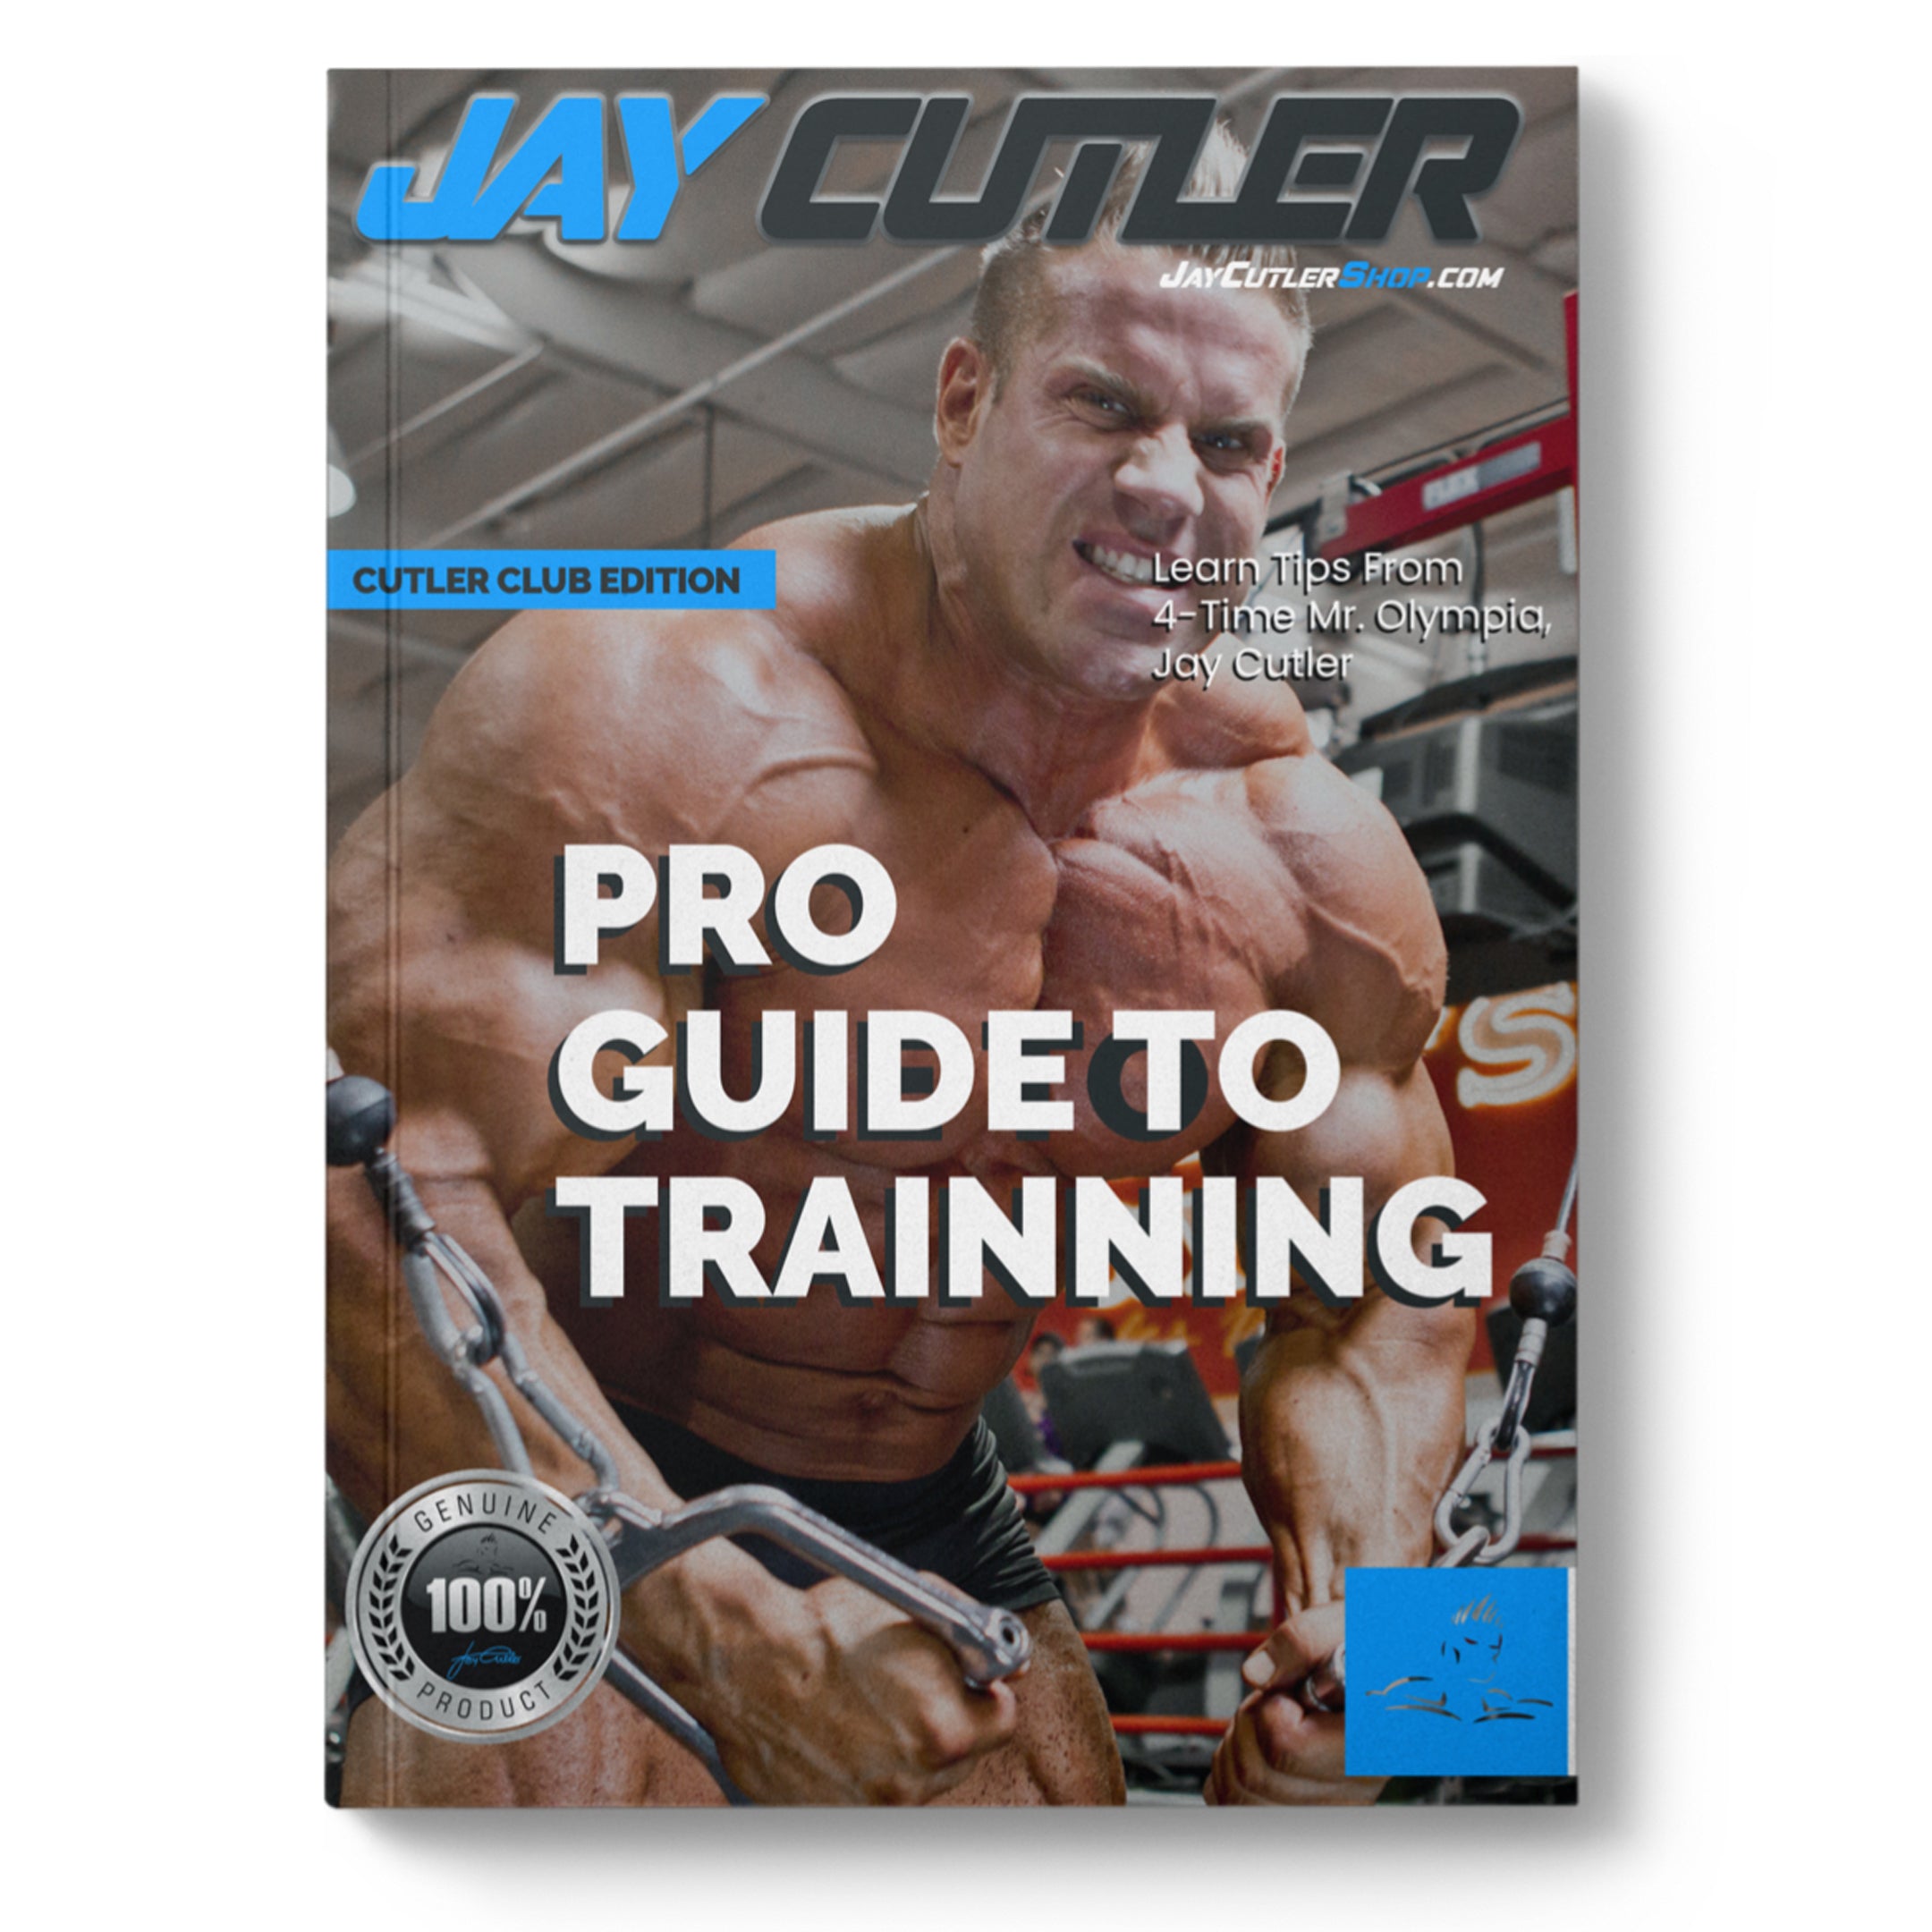 Pro Guide To Training